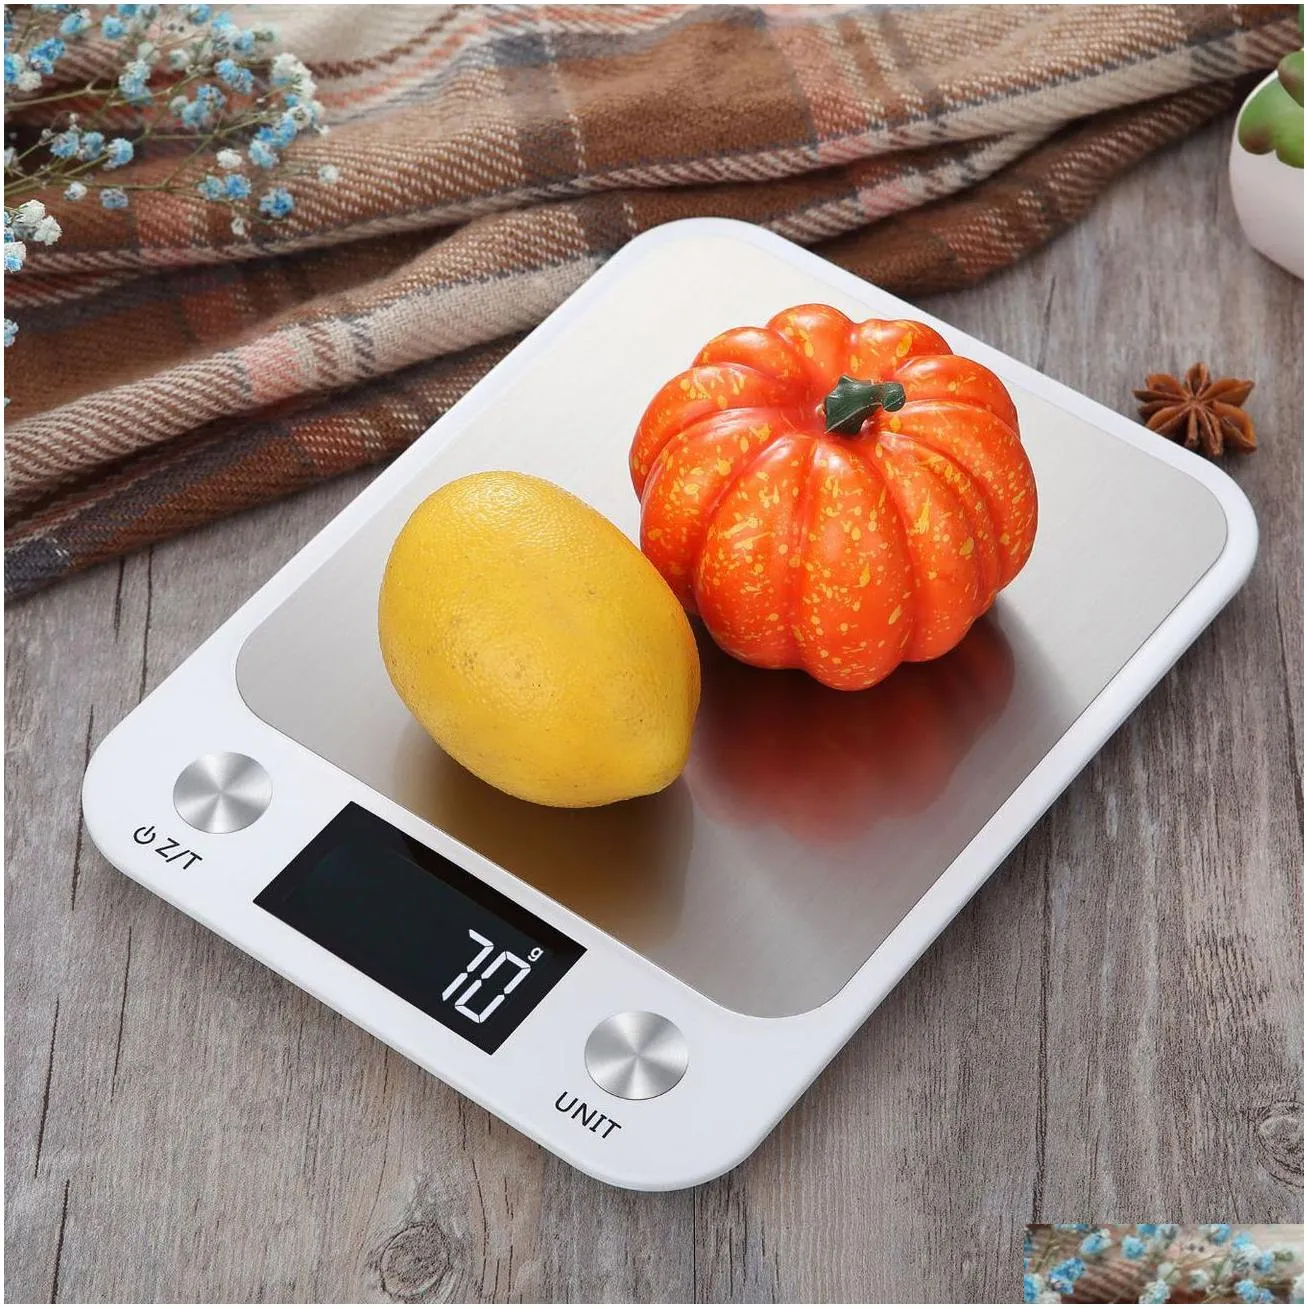 Measuring Tools Kitchen Scale Weighing Food Coffee Nce Smart Electronic Digital Scales Stainless Steel Design For Cooking And Baking D Otakm